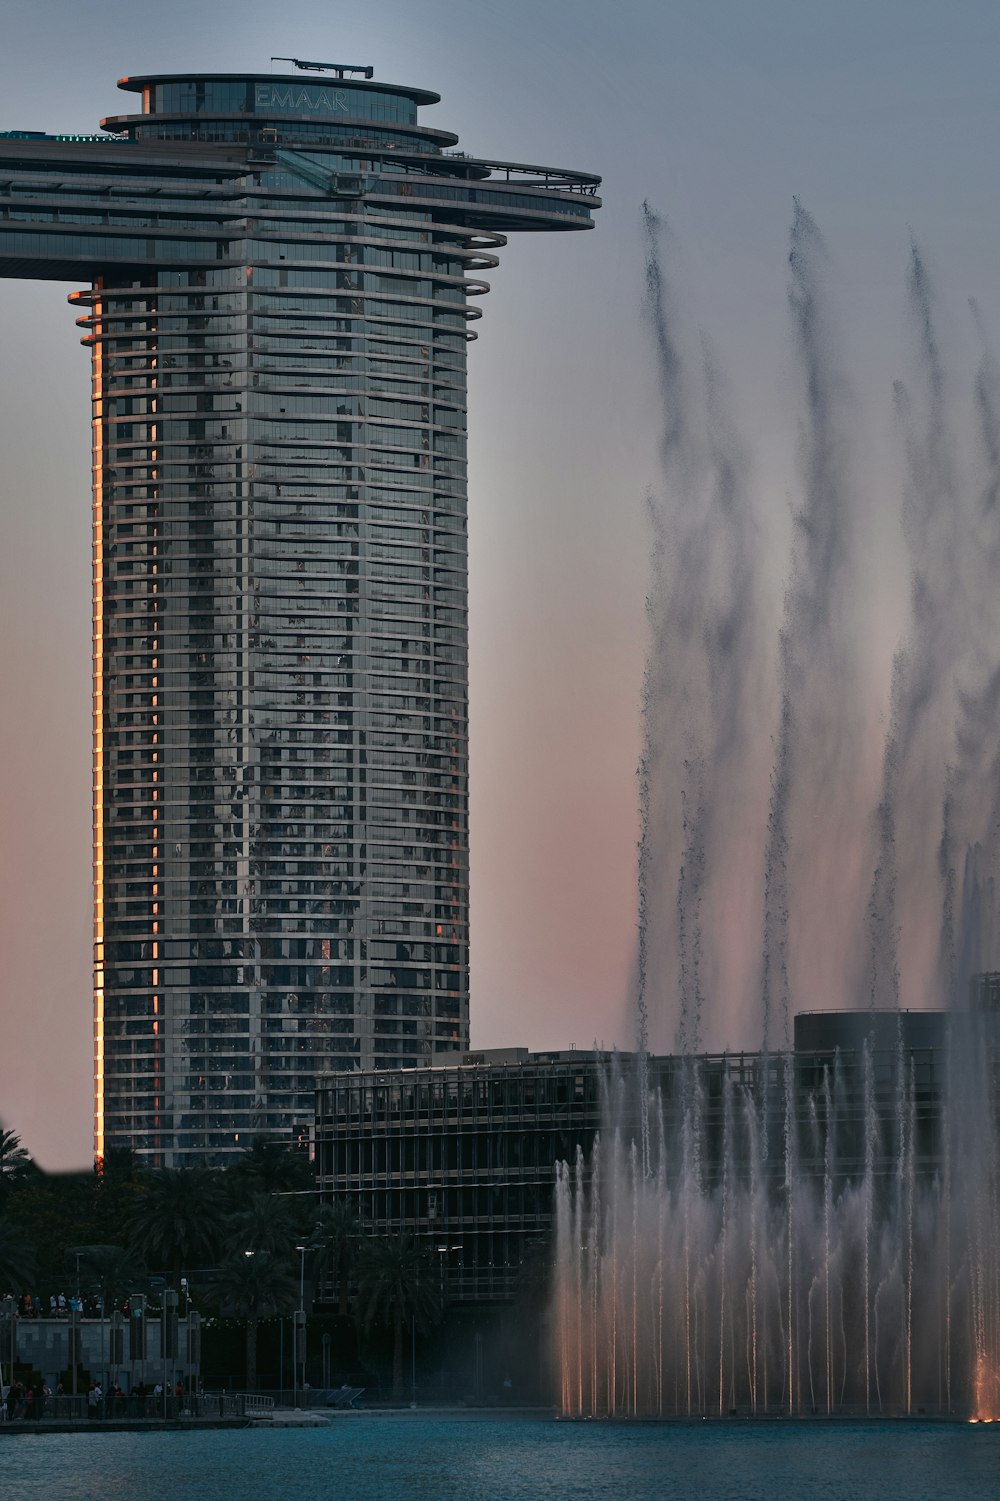 a very tall building with a lot of water shooting out of it